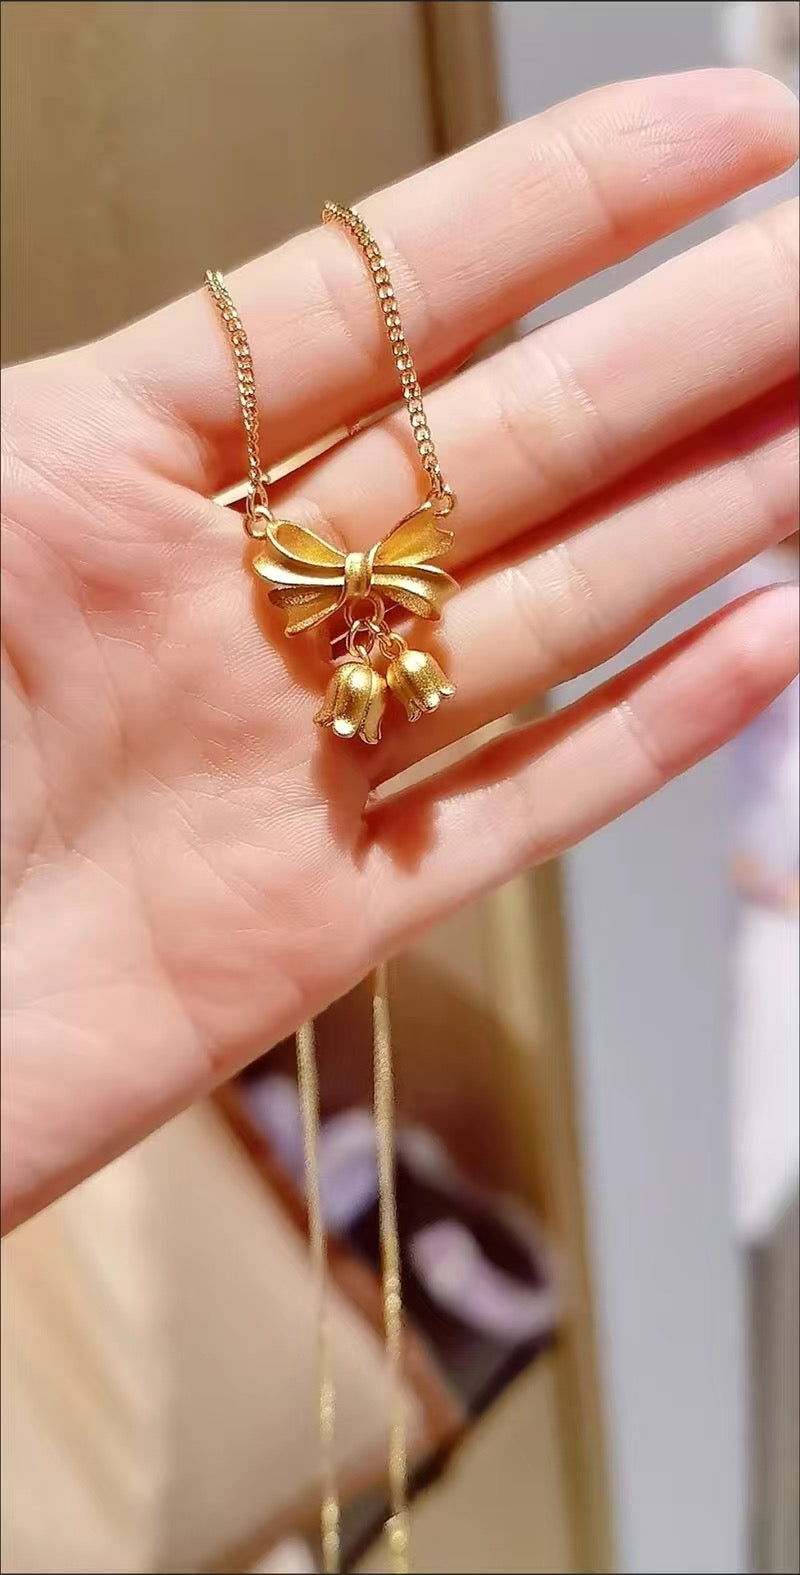 Sweetheart Romantic Bow Knot Bell Necklace